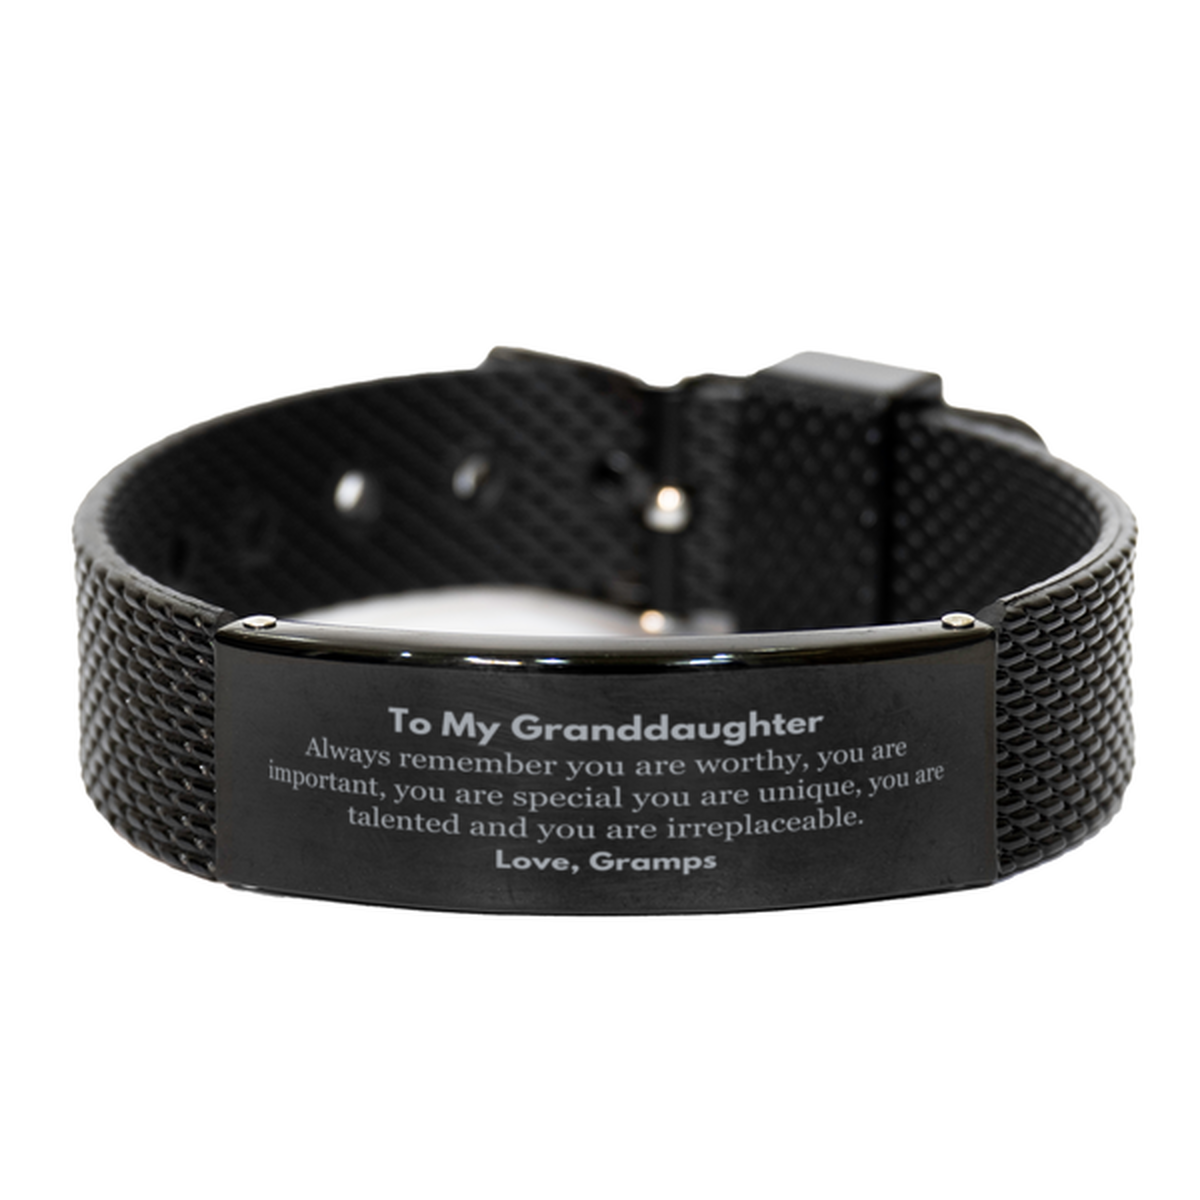 Granddaughter Birthday Gifts from Gramps, Inspirational Black Shark Mesh Bracelet for Granddaughter Christmas Graduation Gifts for Granddaughter Always remember you are worthy, you are important. Love, Gramps